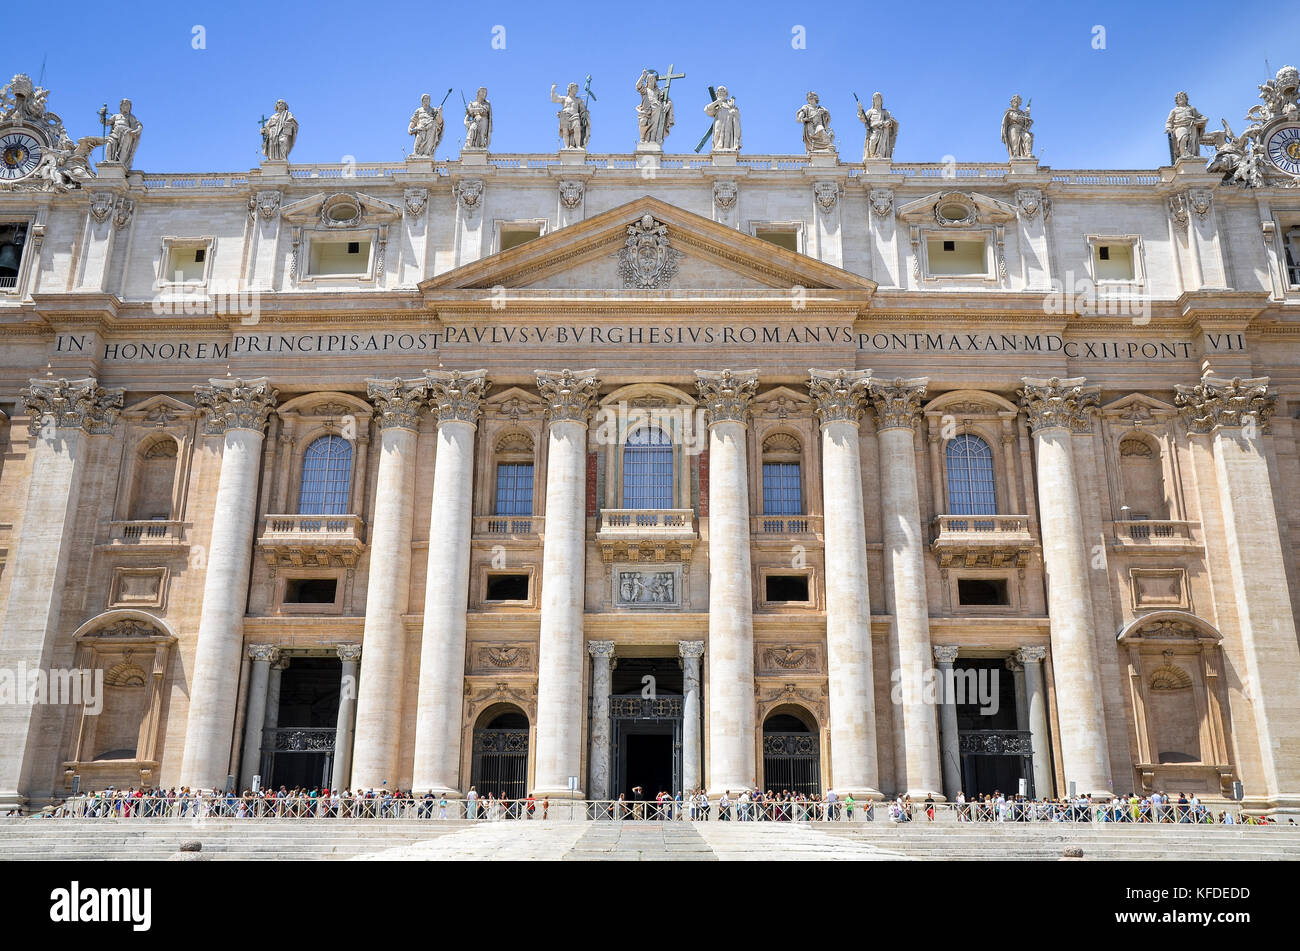 St Peter's Basilica in Rome, Italian Renaissance architecture, and UNESCO world heritage site. Facade with columns, inscription and statues of religio Stock Photo